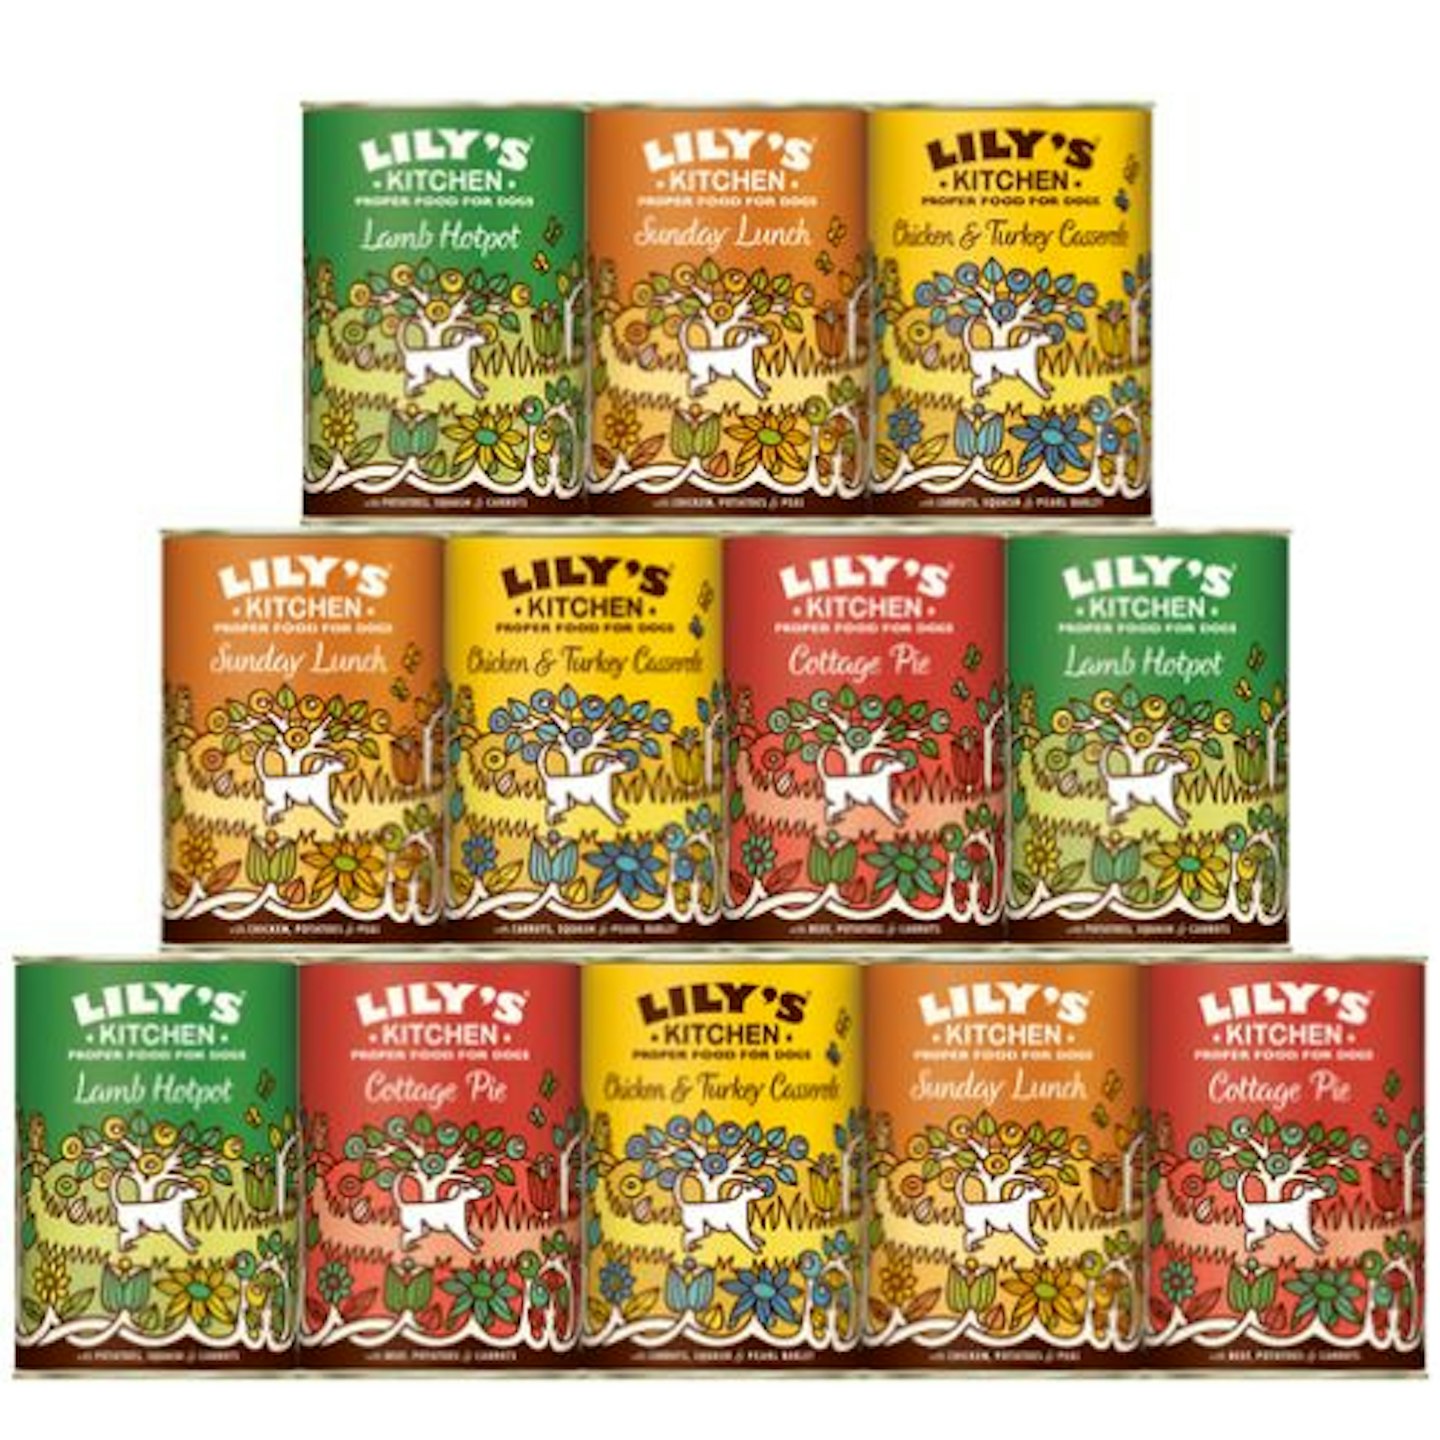 Lily's Kitchen Classic Dinner Multipack Wet Dog Food